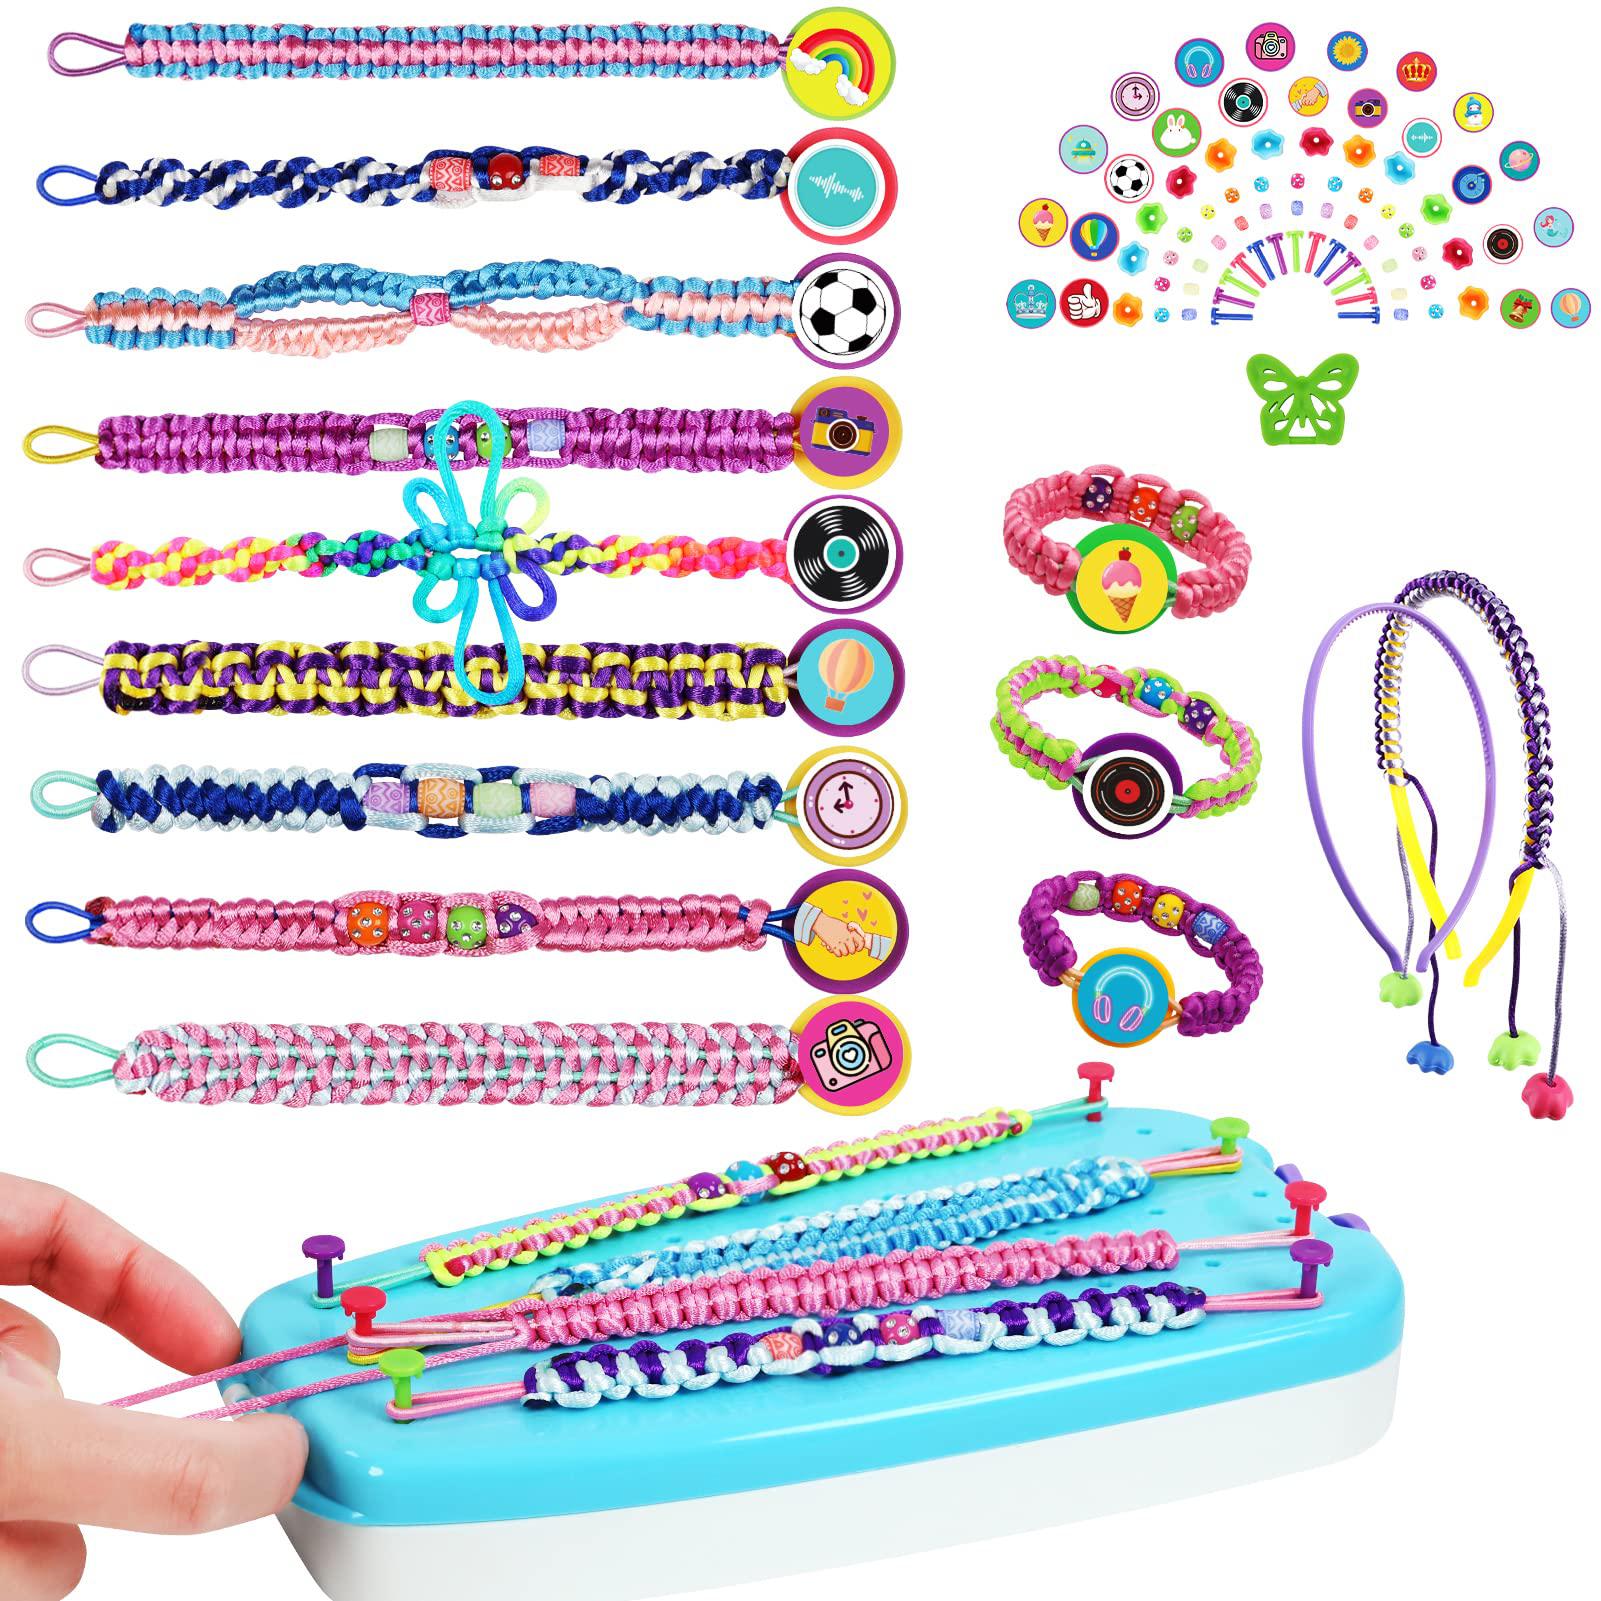 funbud friendship bracelet making kit for teen girls - arts and crafts  ideas for kids age 6 7 8 9 10-12, diy handmade toys for birth